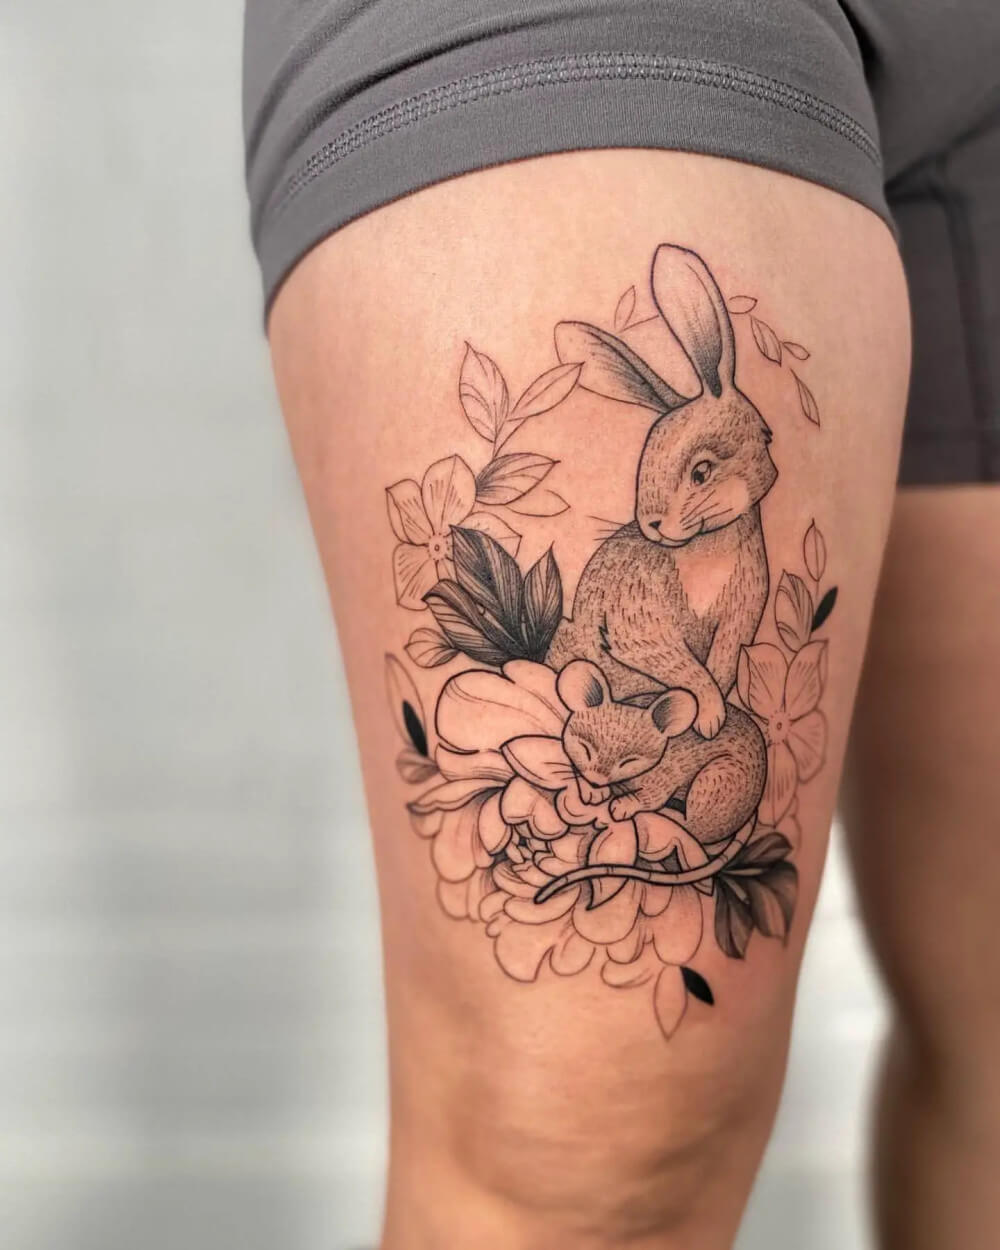 30 Lovely Rabbit Tattoo Ideas That Are Hard To Resist - 201